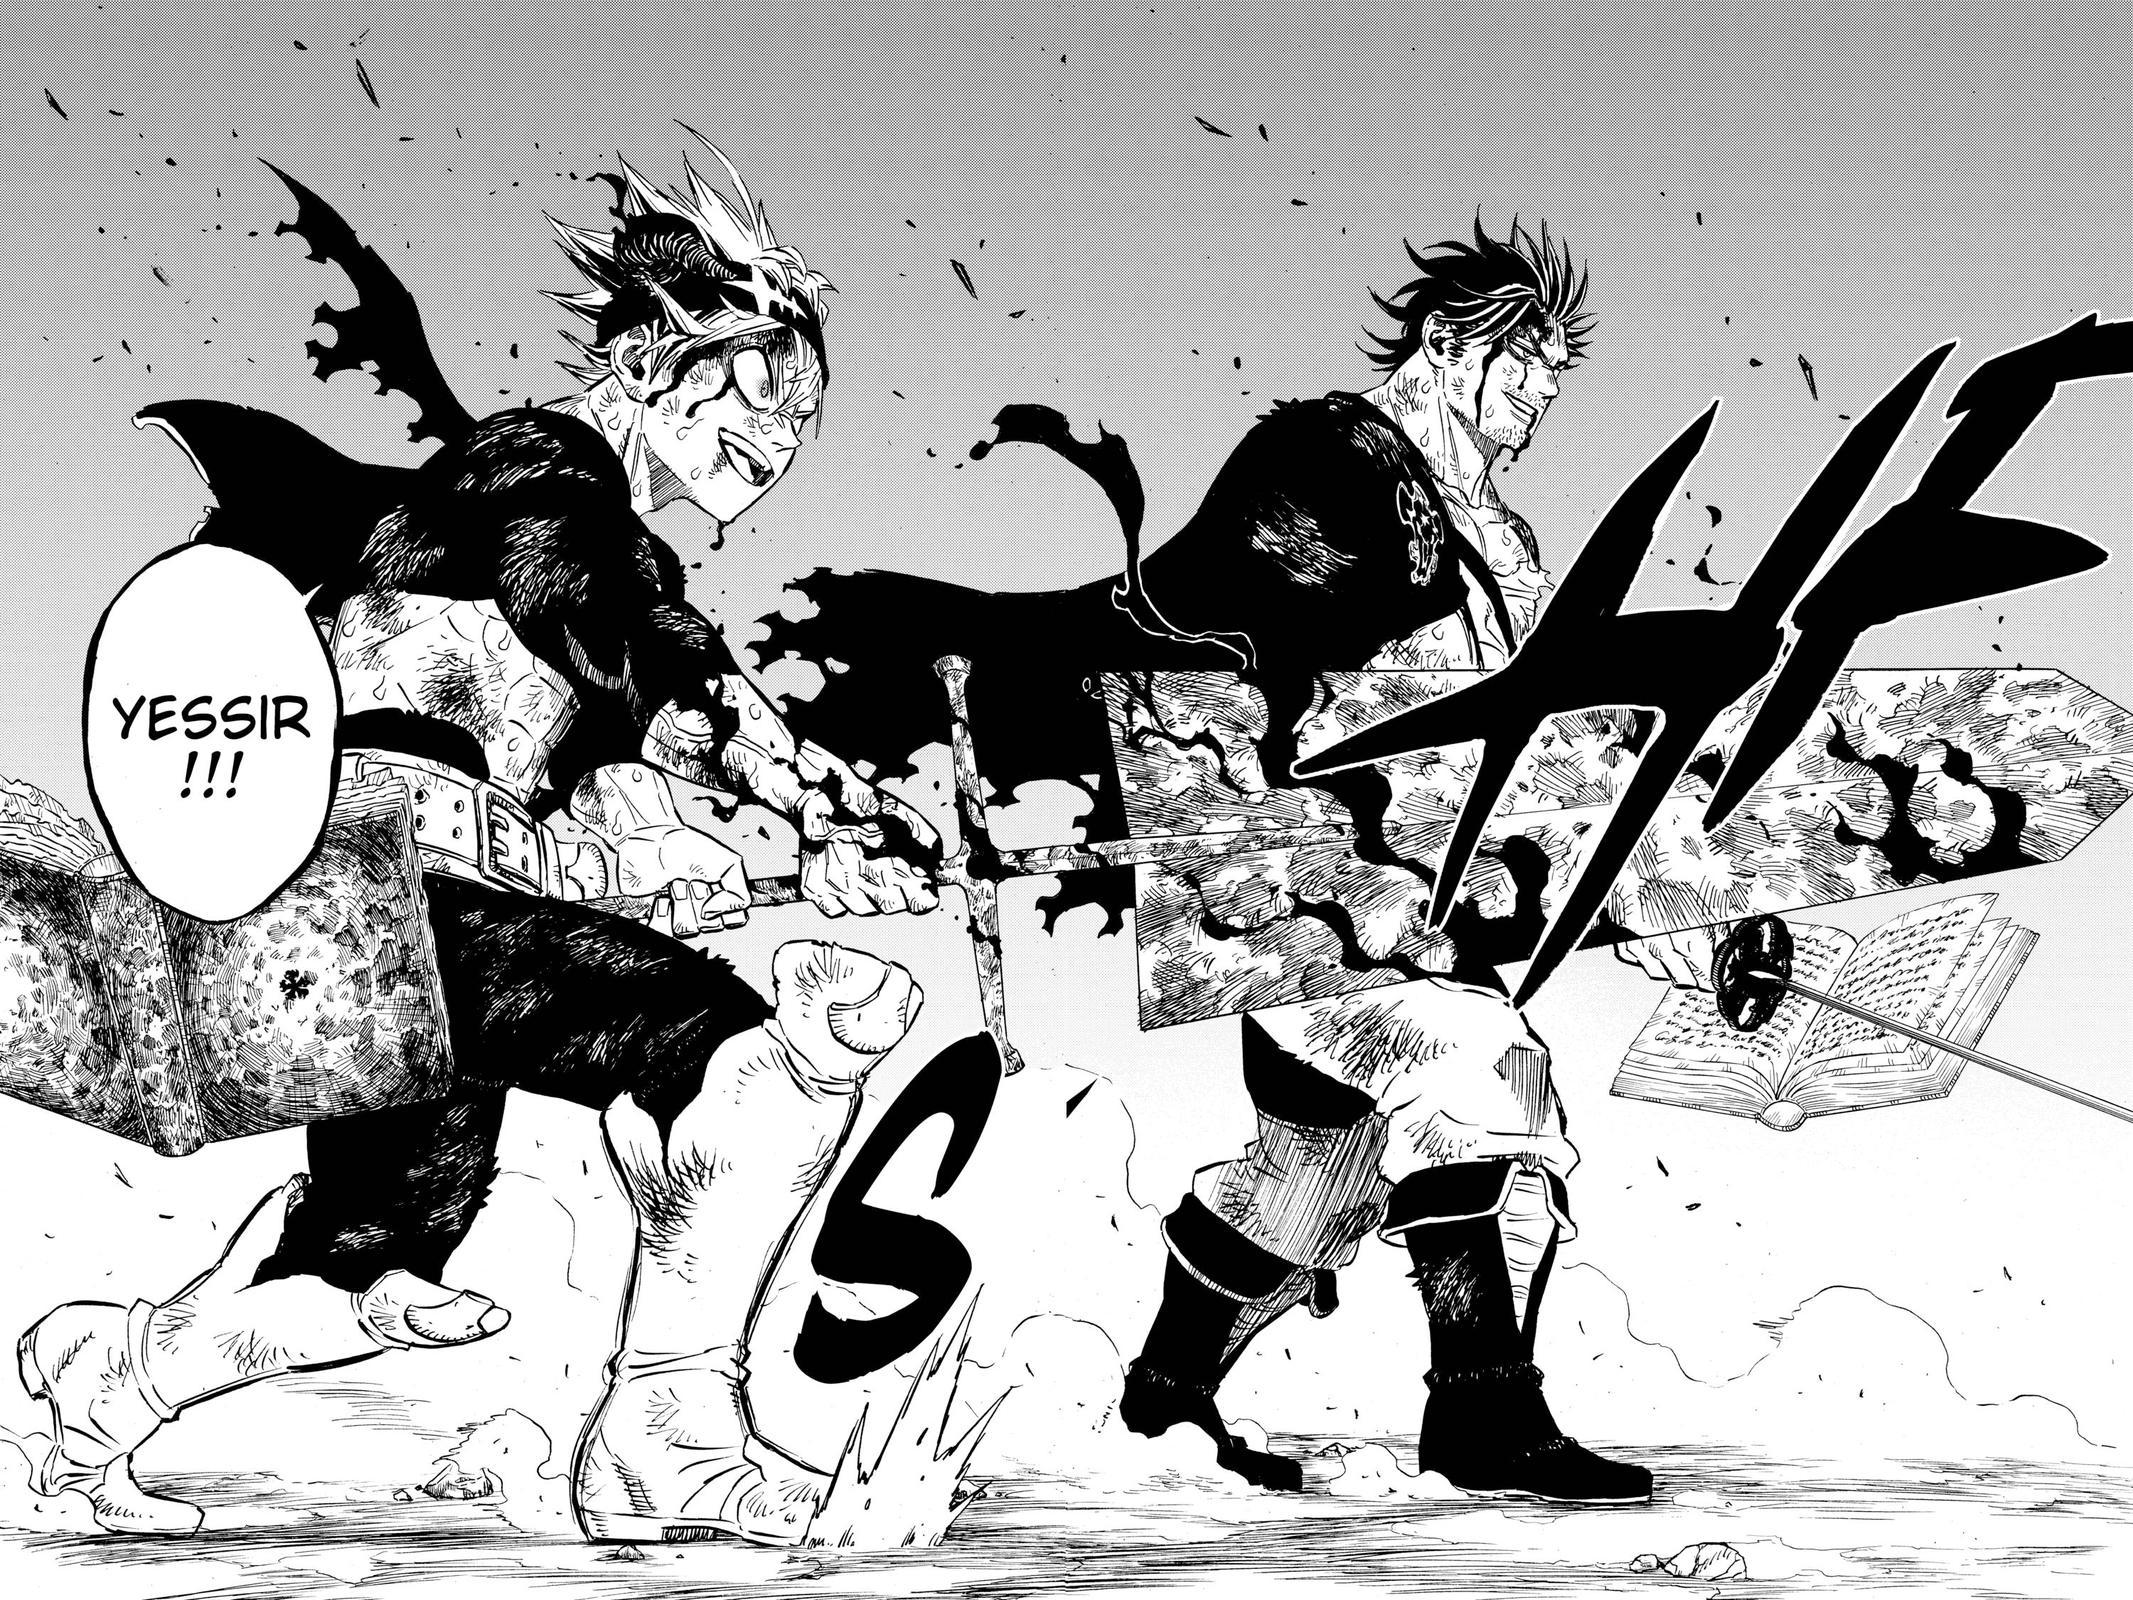 sta and Yami fighting side by side, looking all thrilled and revved up for the fight against Dante from black clover